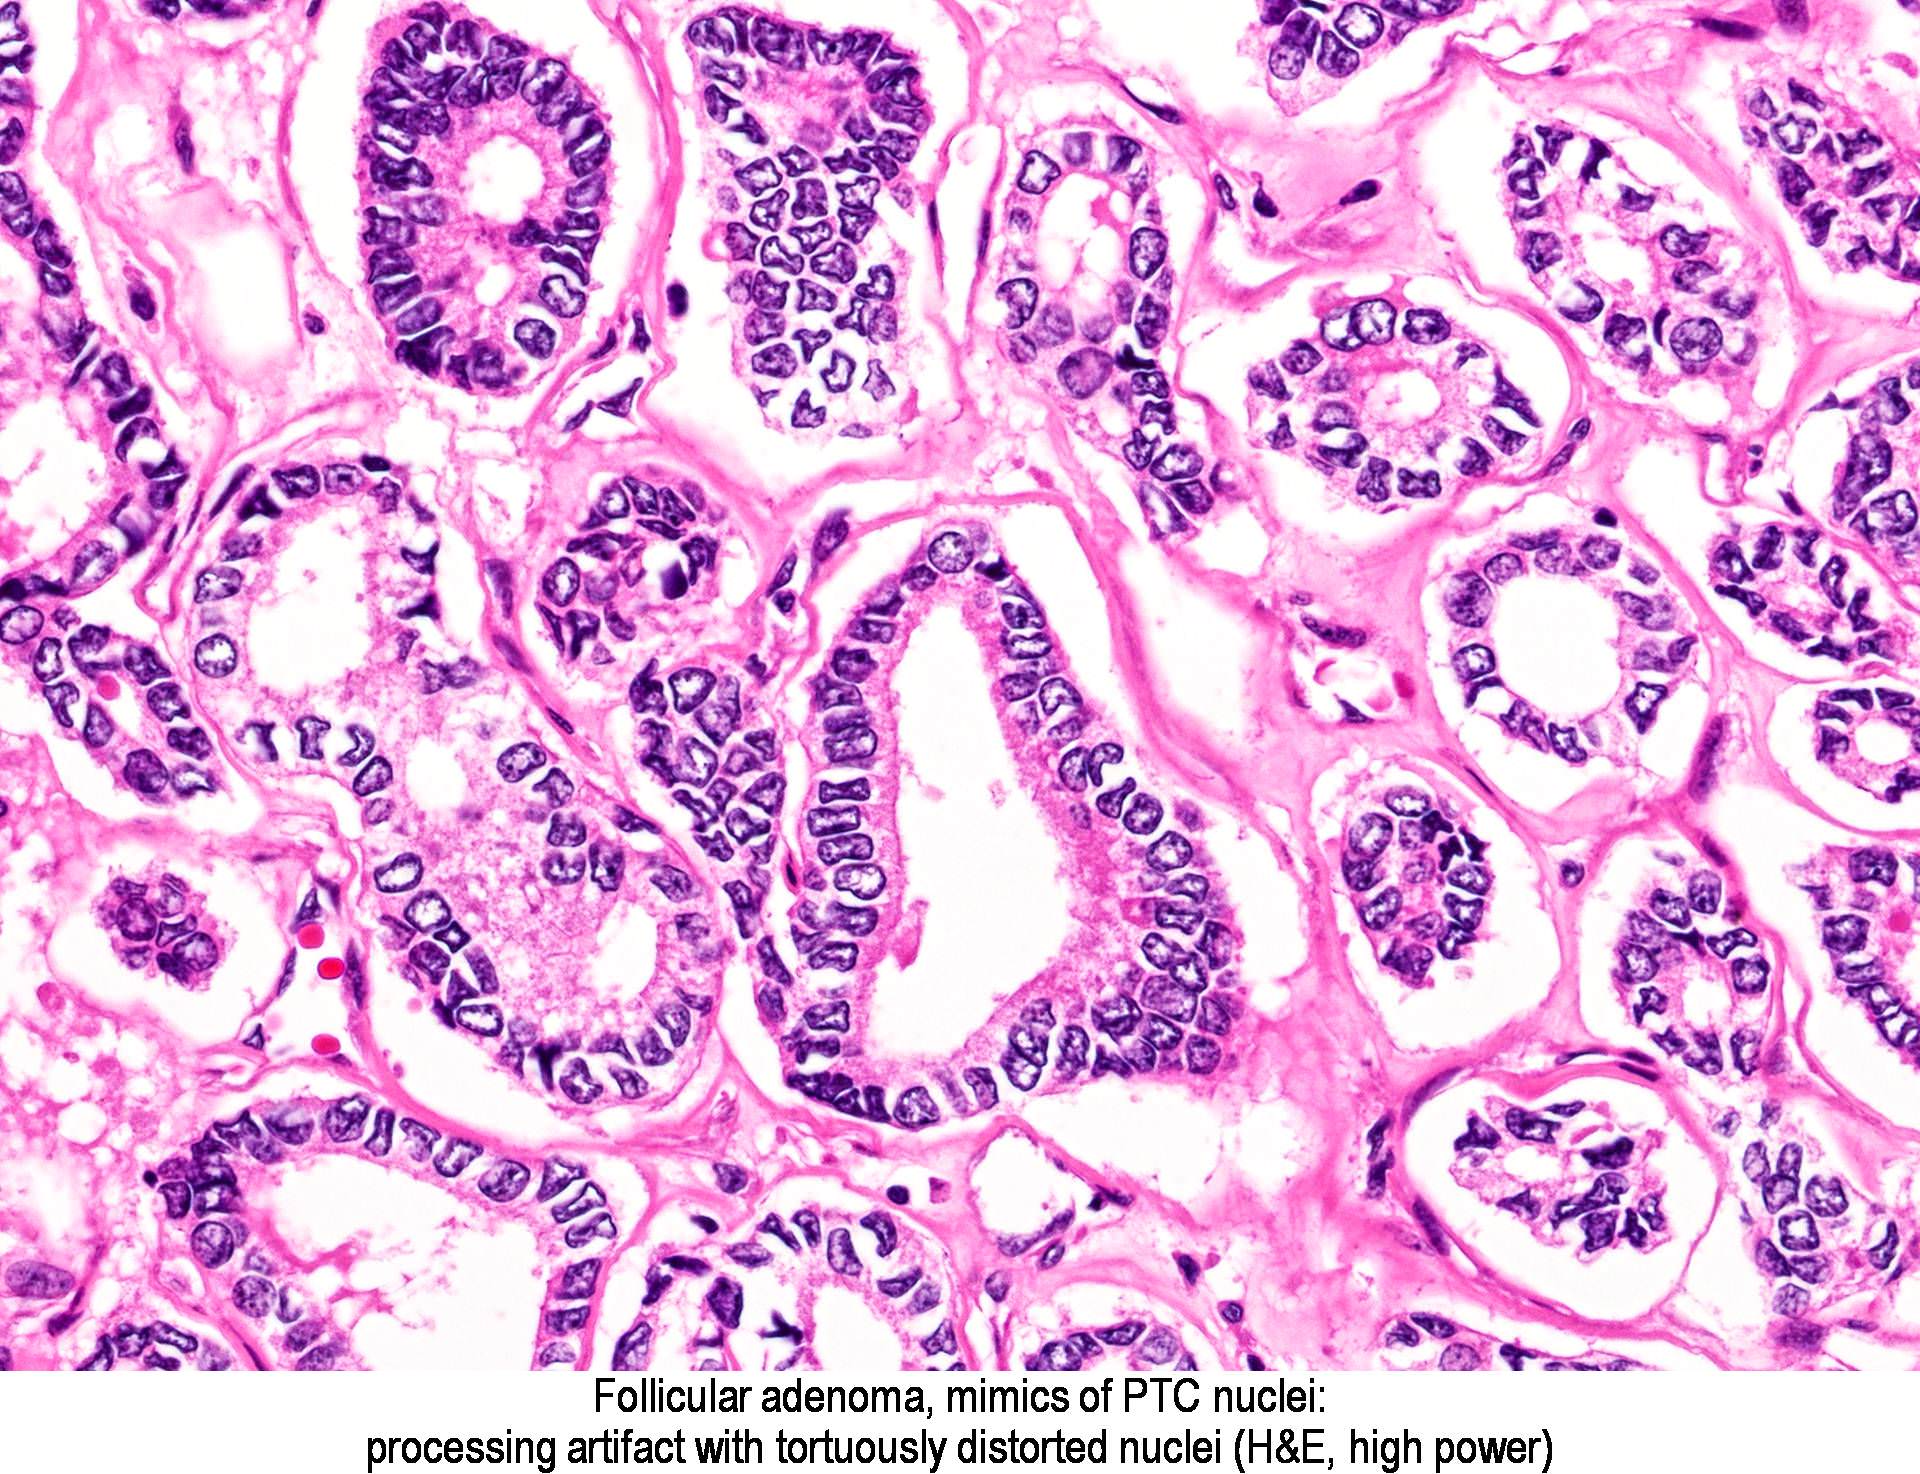 Pathology Outlines - Noninvasive follicular thyroid neoplasm with ...